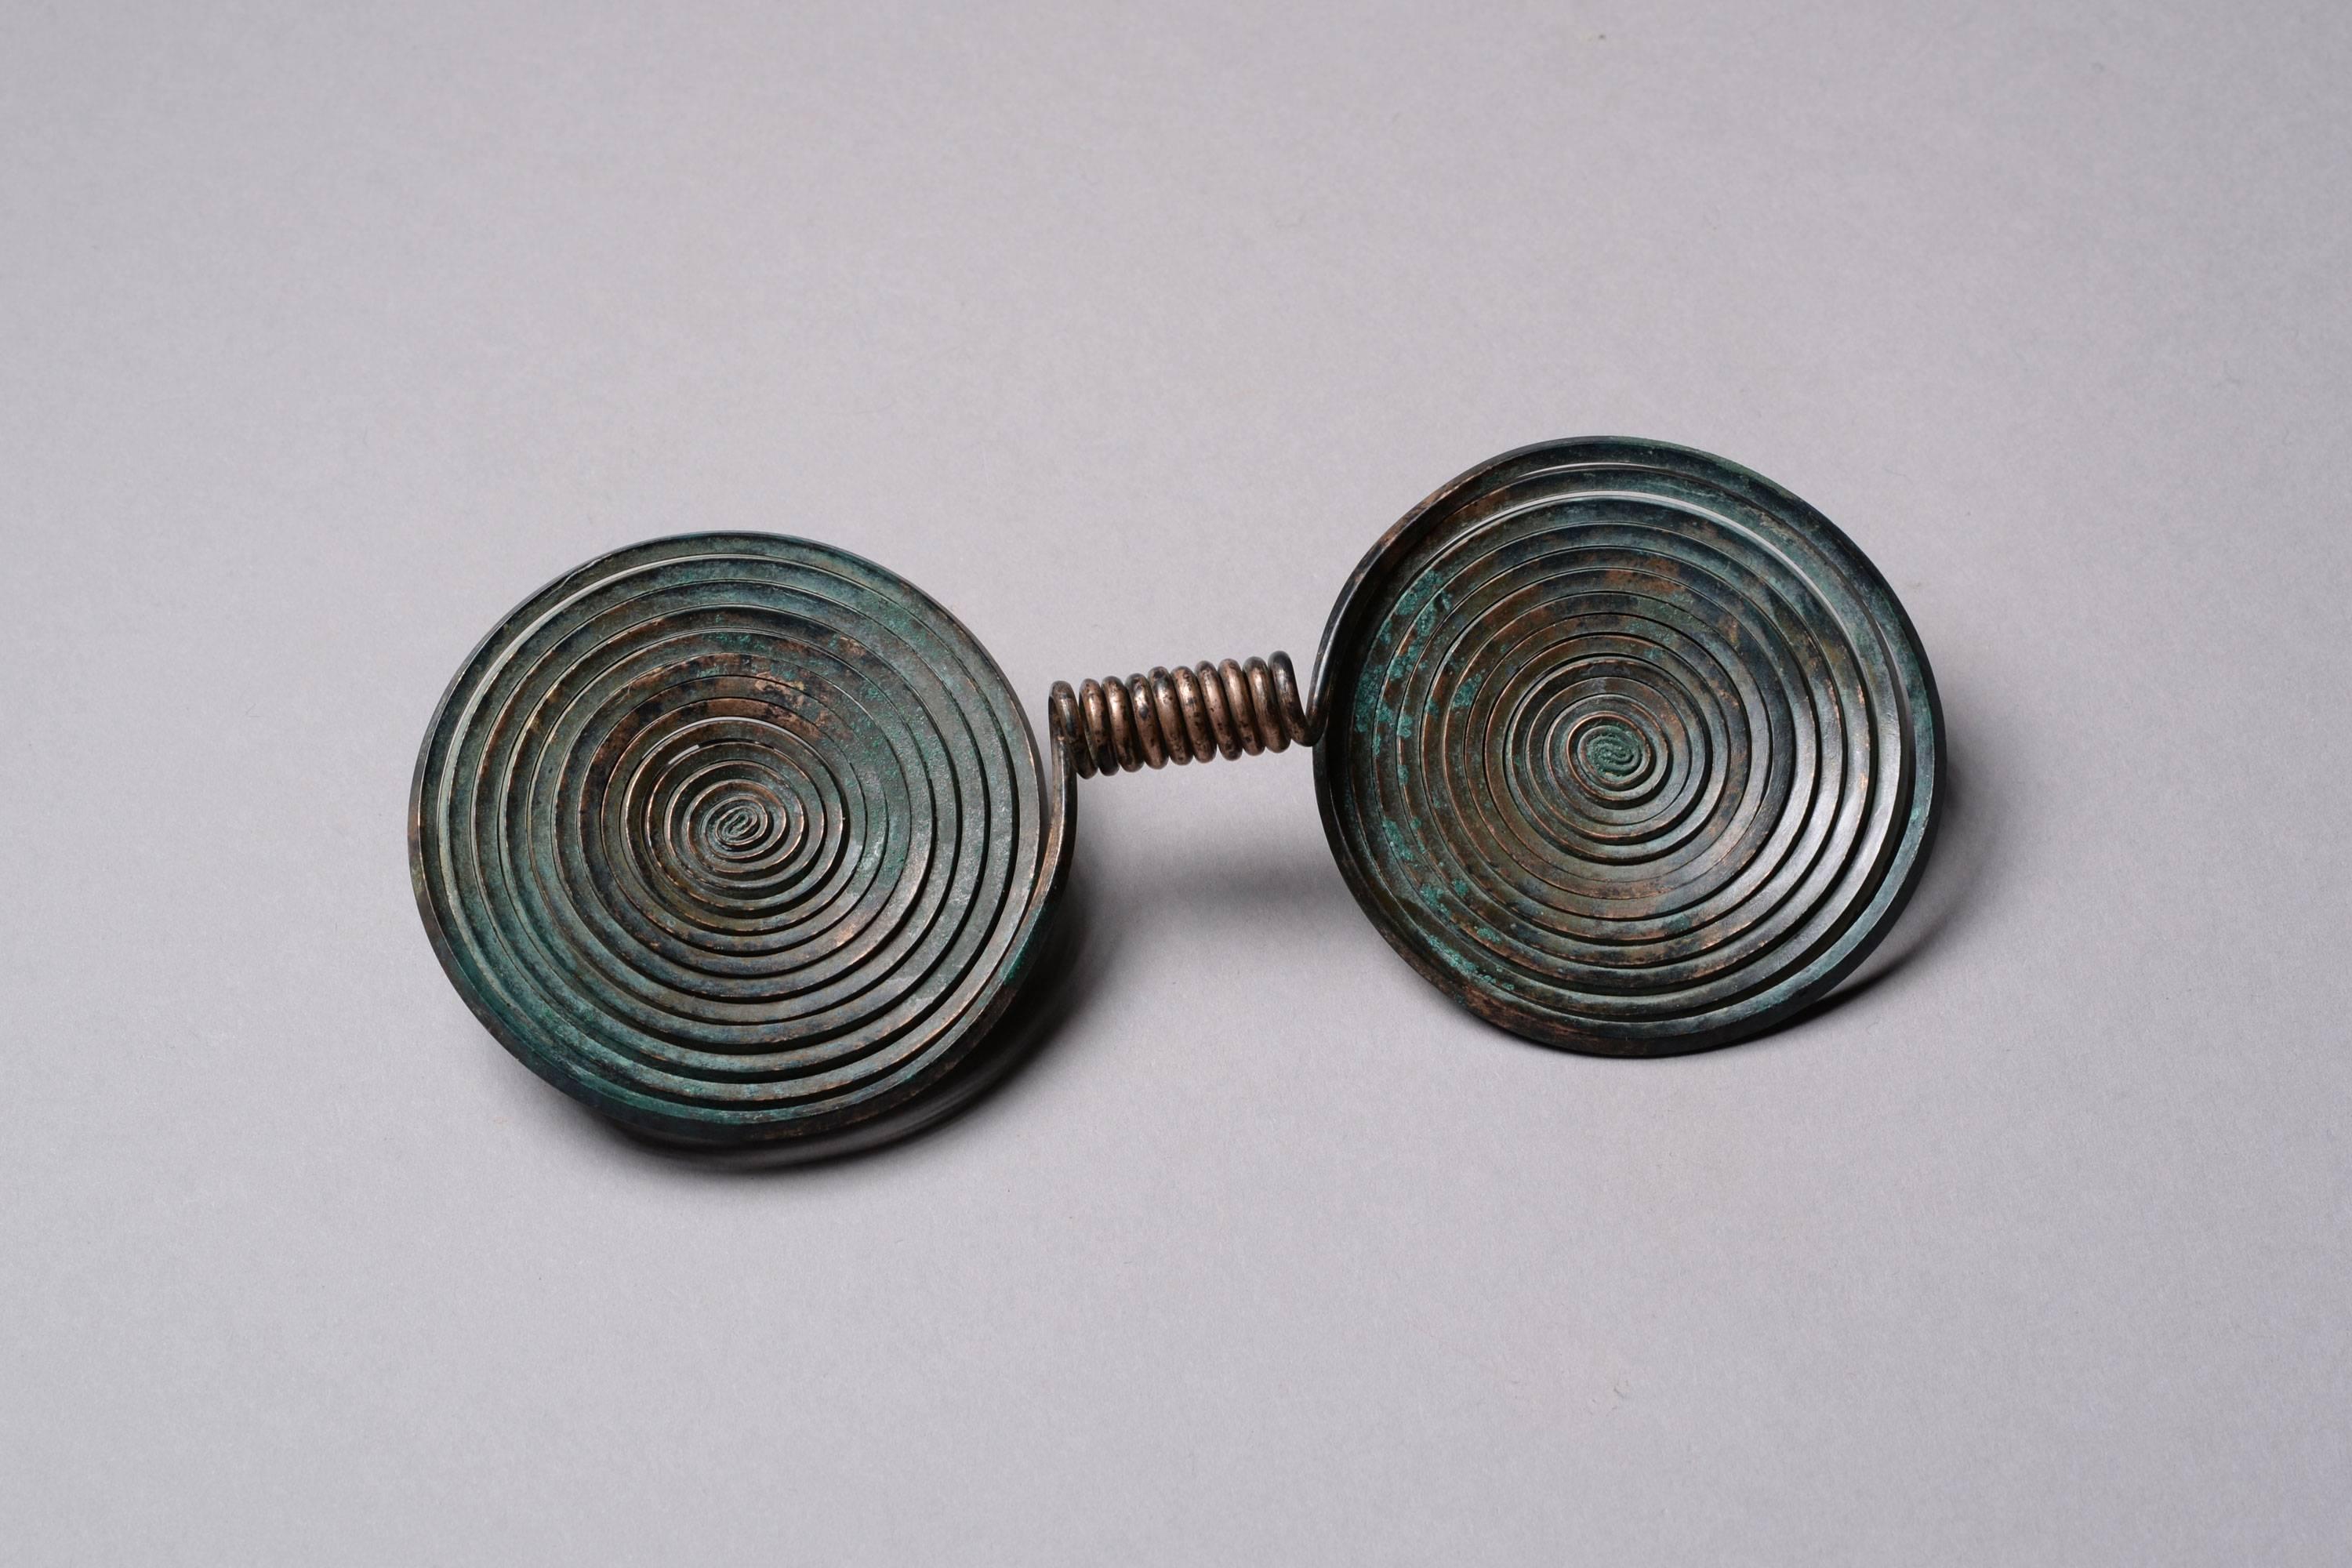 A stunning central European Bronze Age brooch, dating to around 1000 BC.

The piece has been expertly cast into two conjoined spirals of wired disc, meeting in a tight coiled band at the center. The late Bronze Age in Europe saw a flourishing of